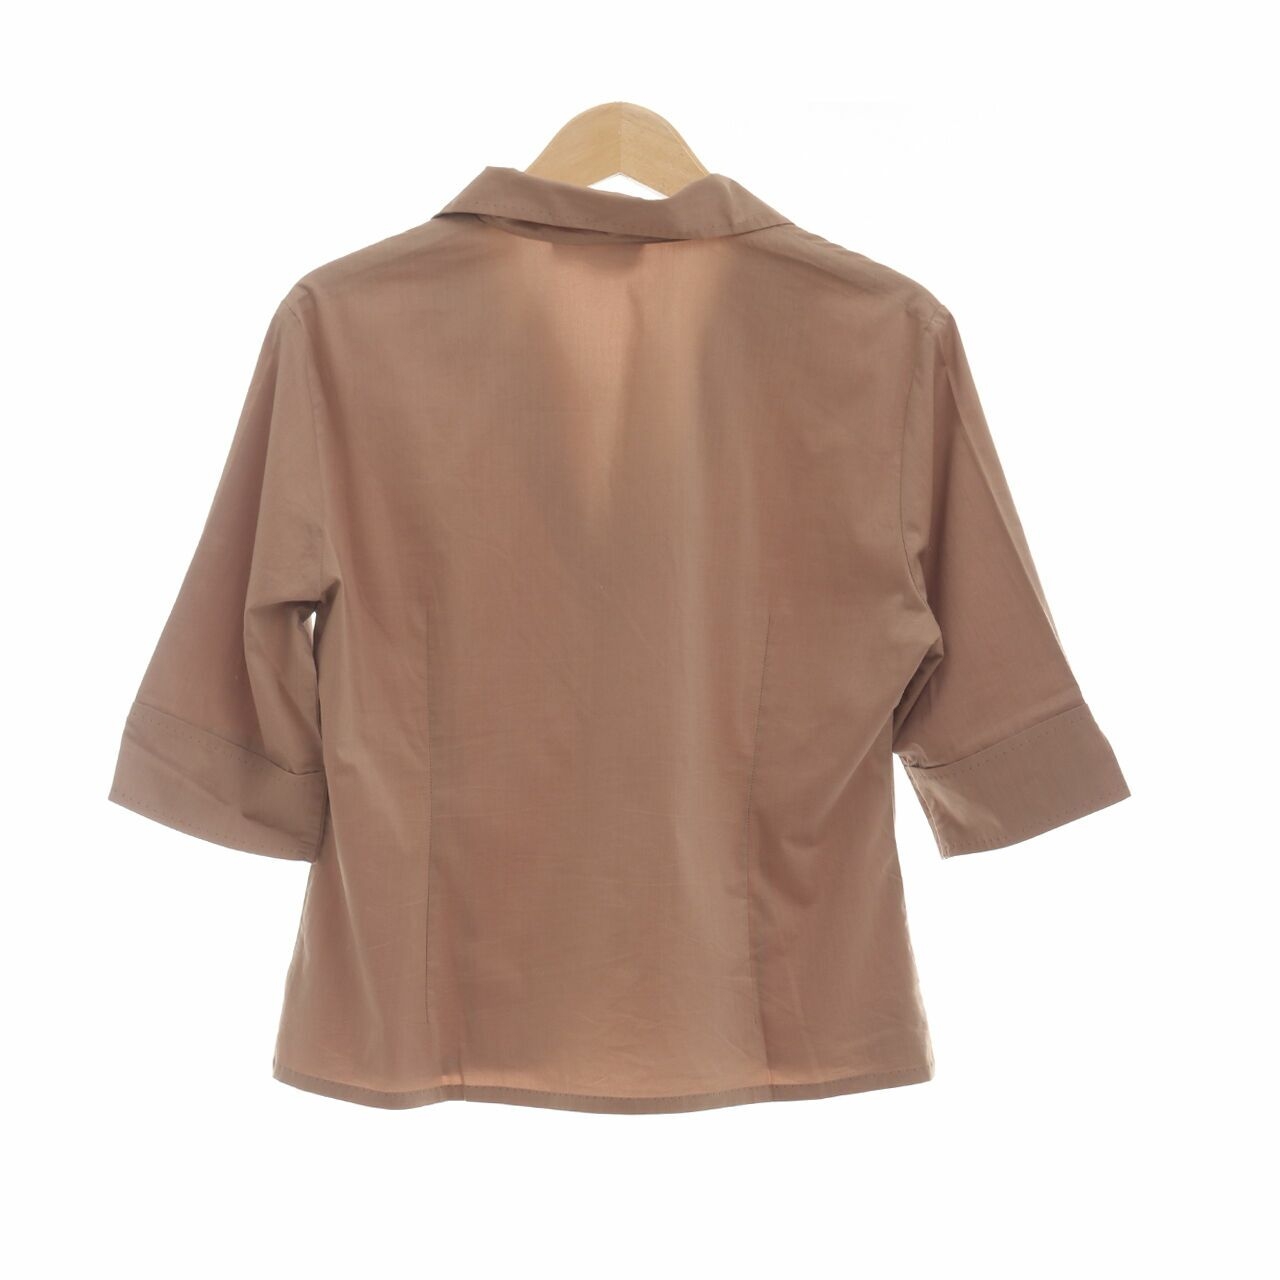 Country Road Brown Blouse